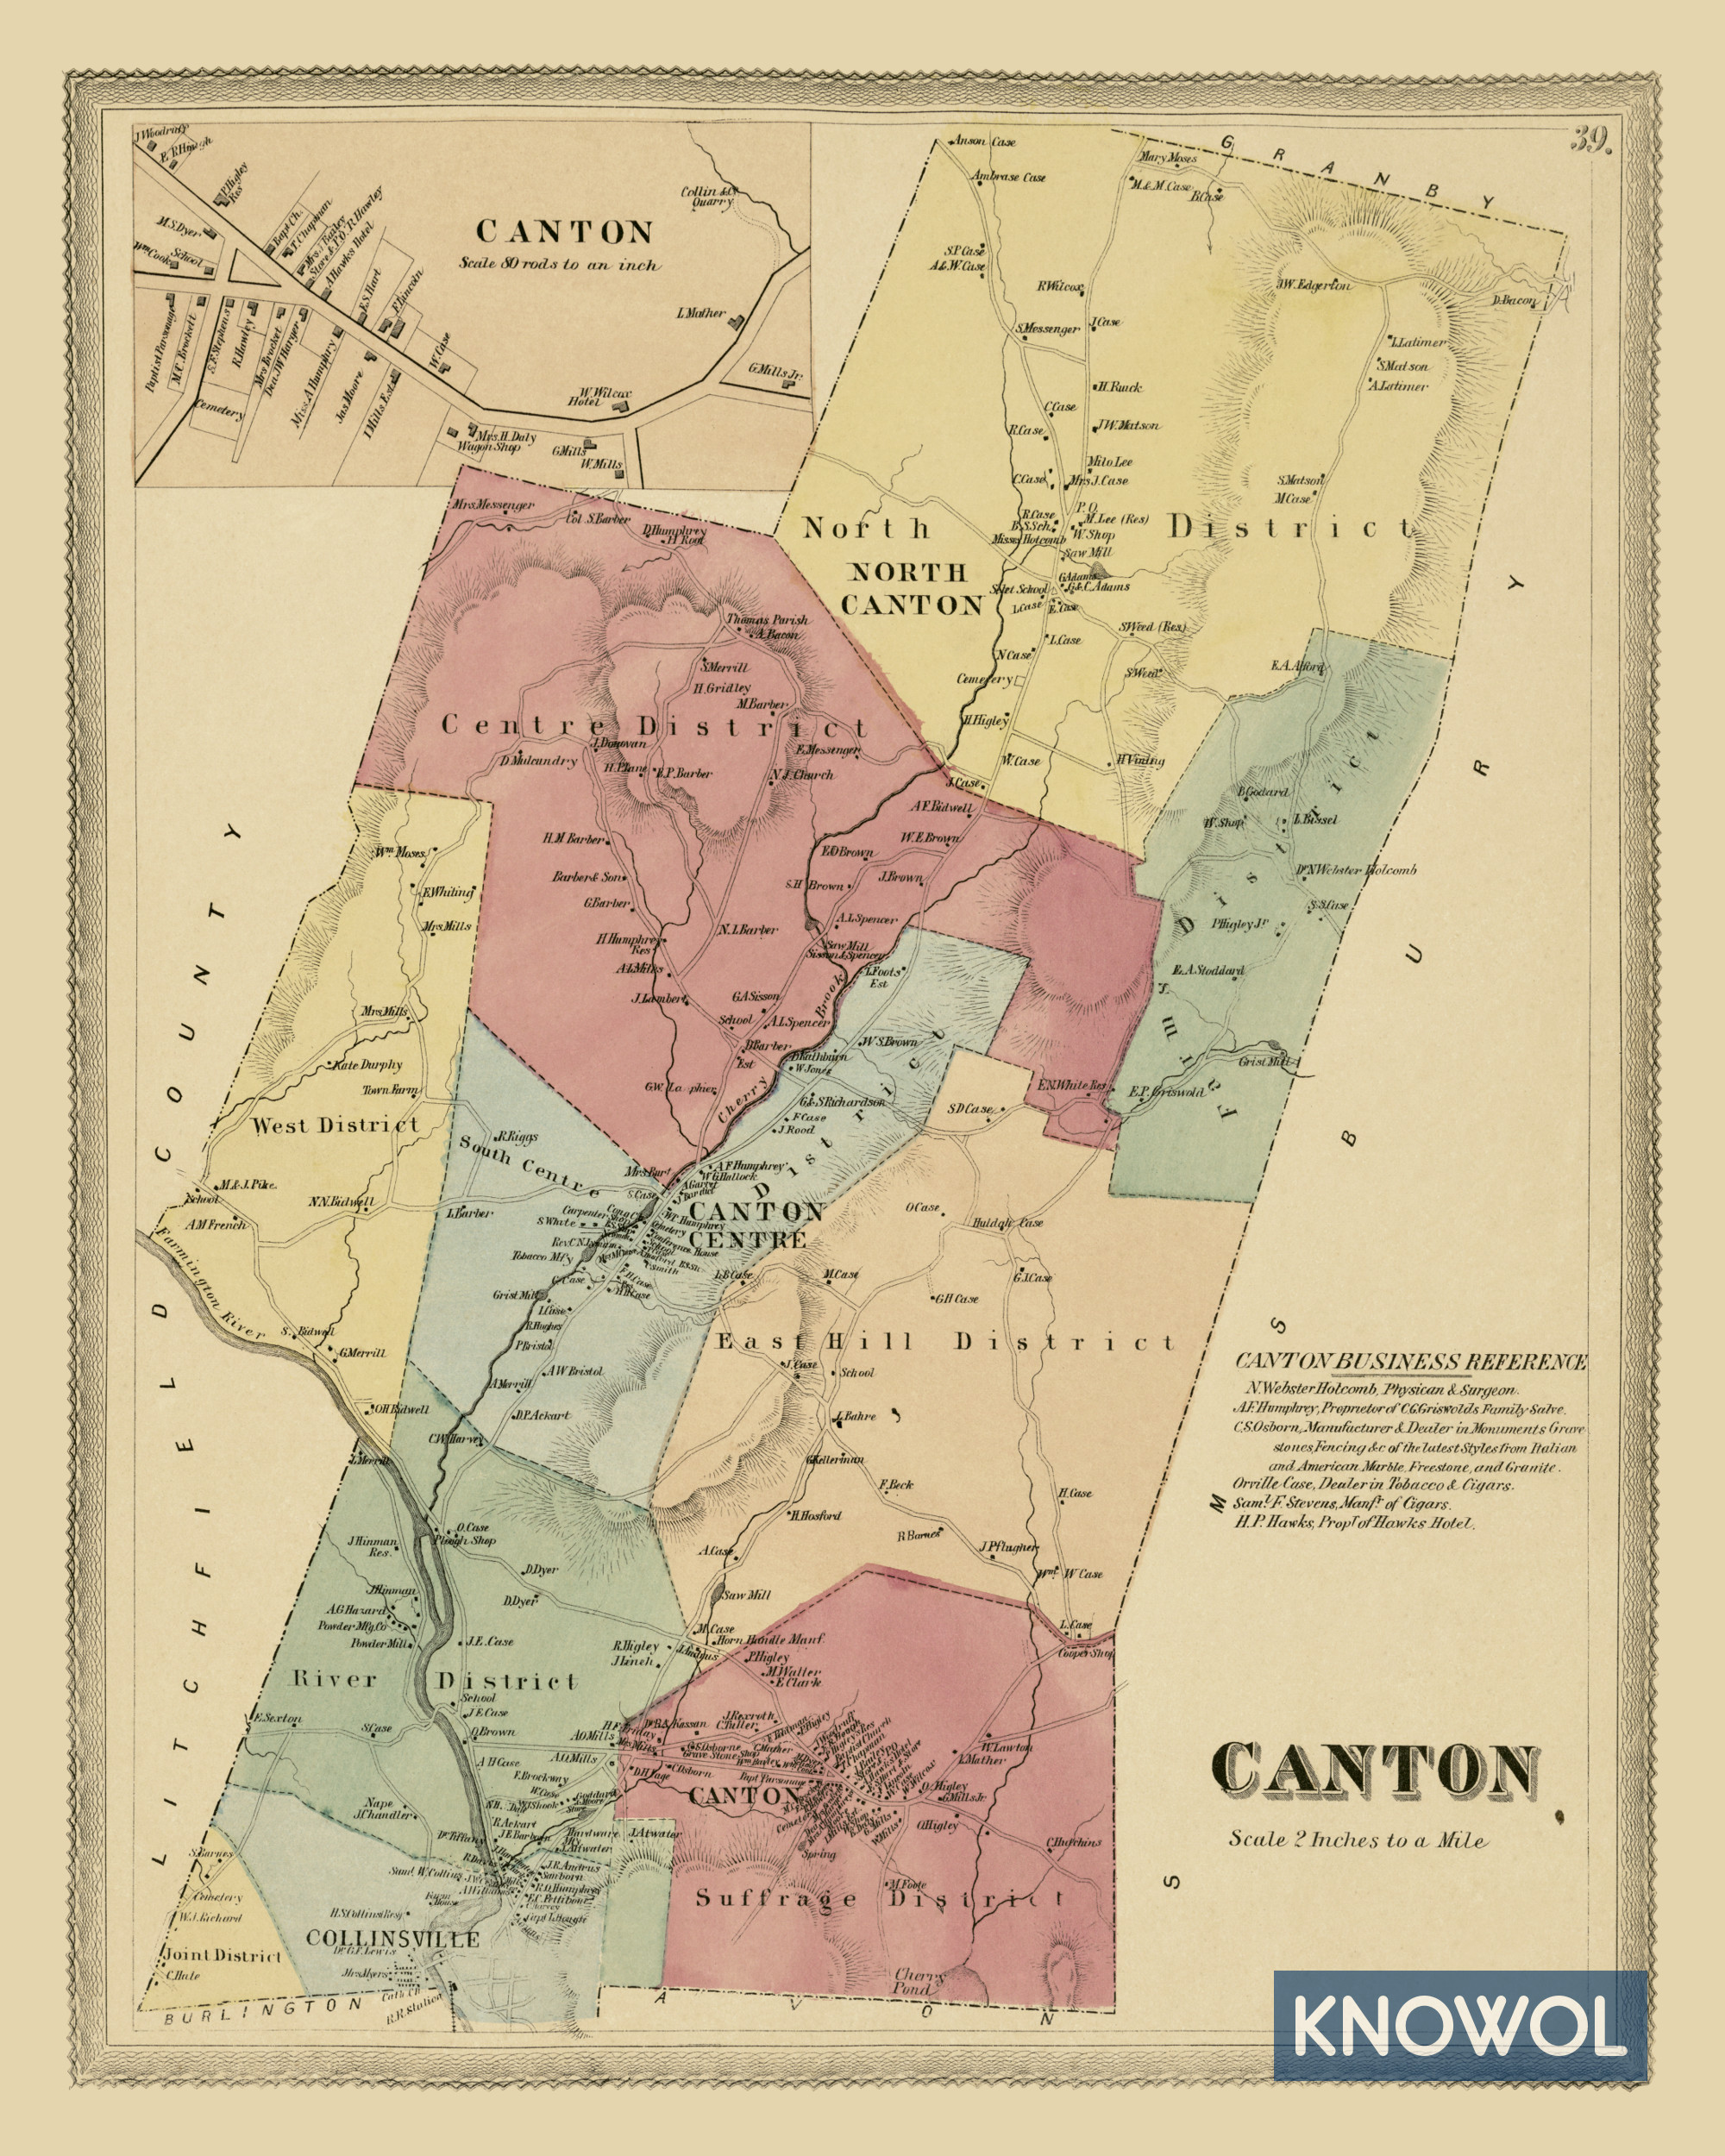 Beautifully restored map of Canton, CT from 1869 - KNOWOL